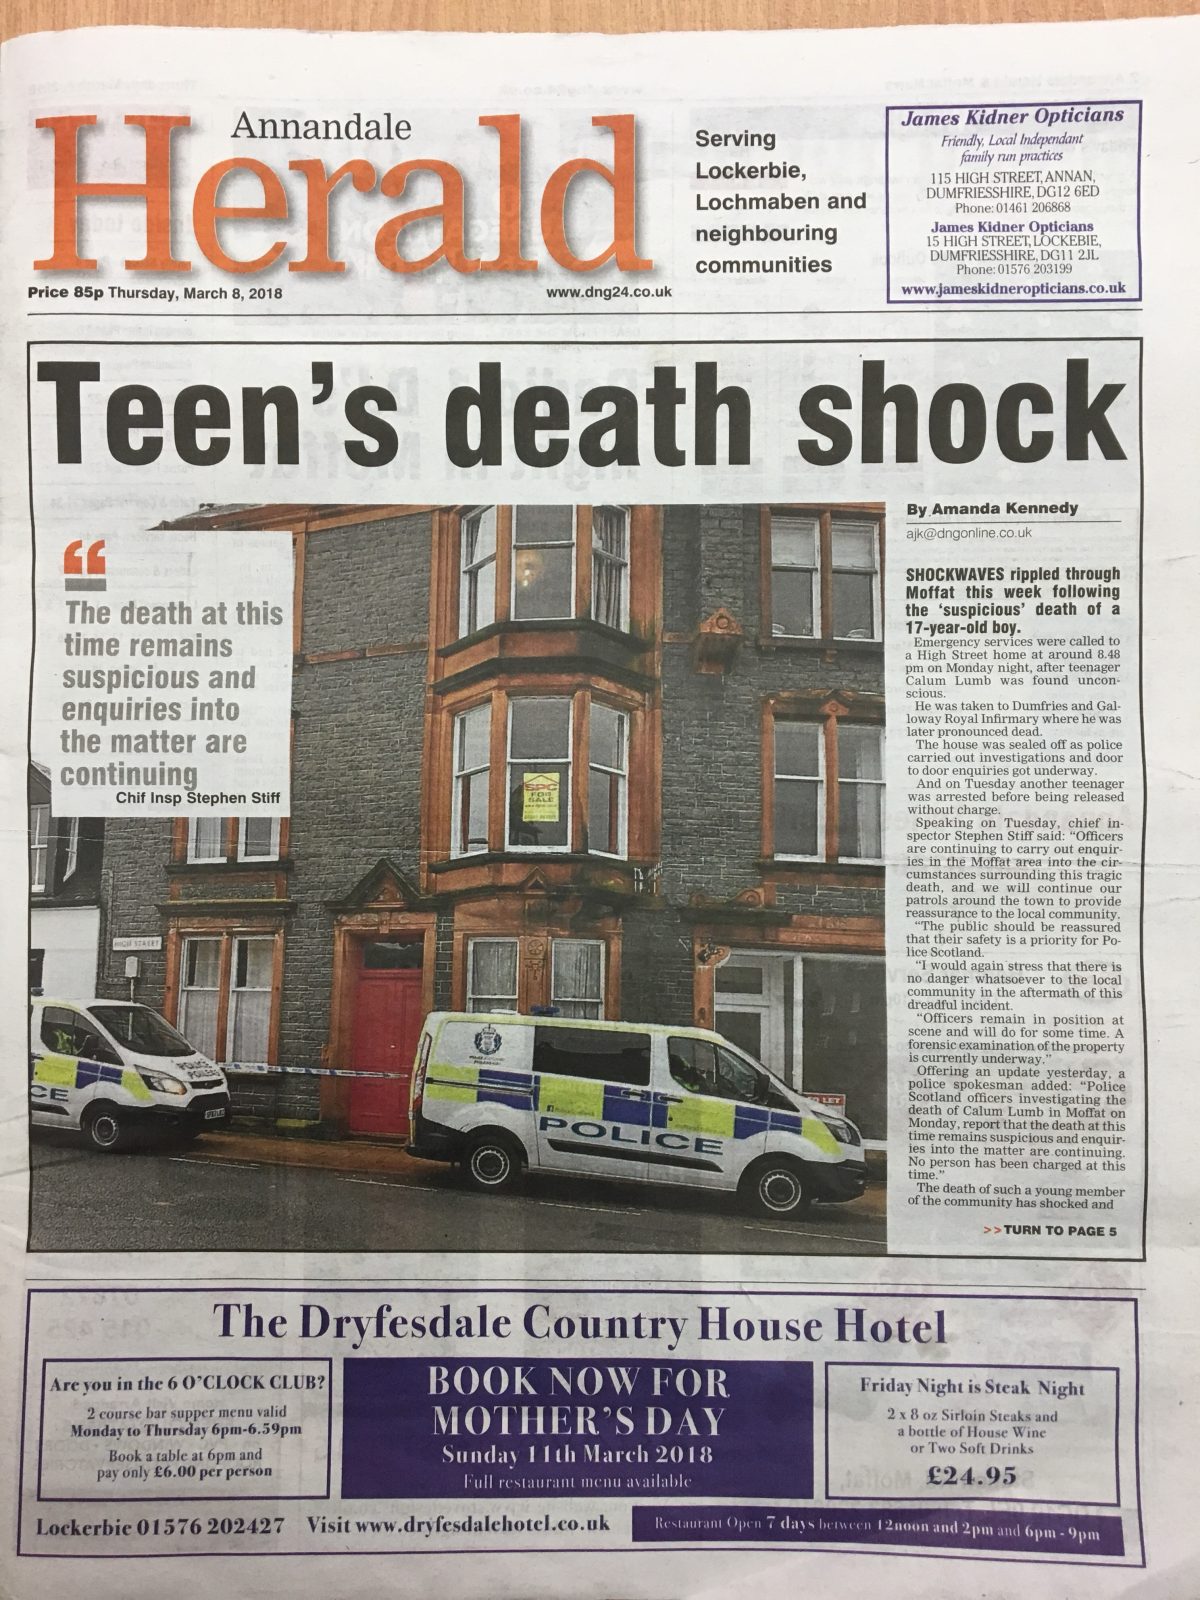 Annandale Herald 20180308